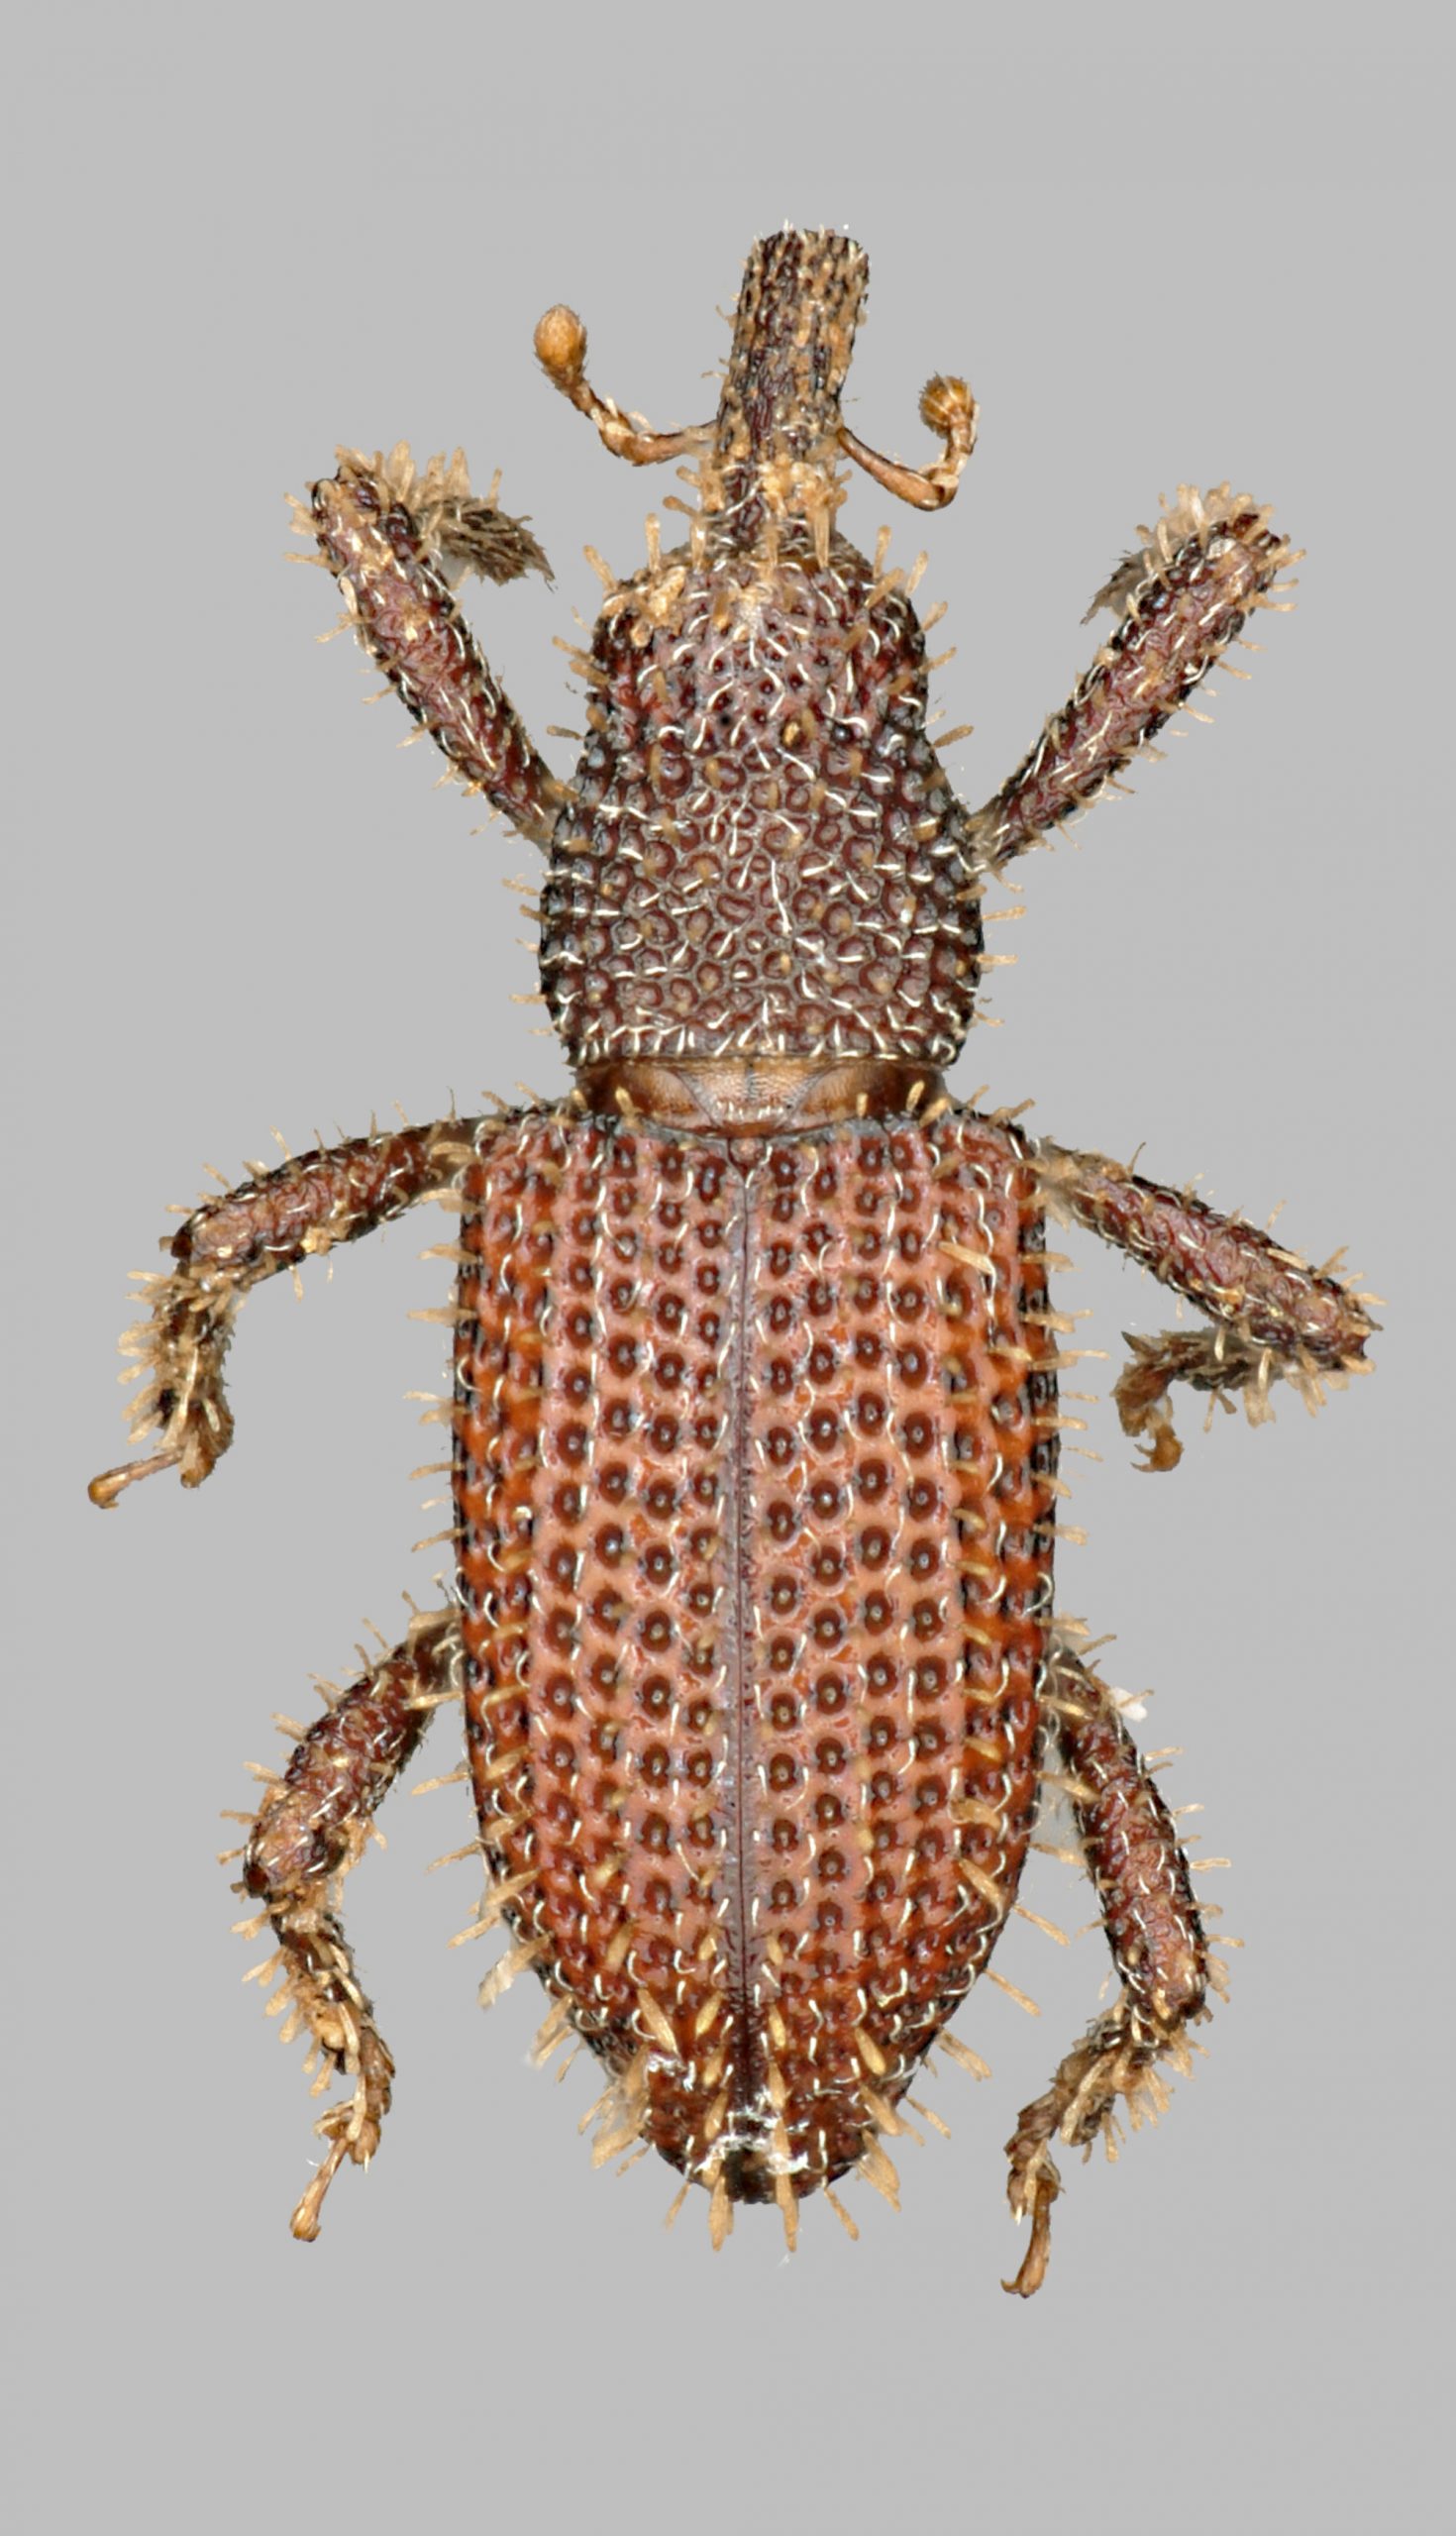 Read more about the article Newly-Discovered Weevil Named After Human Rights Activist